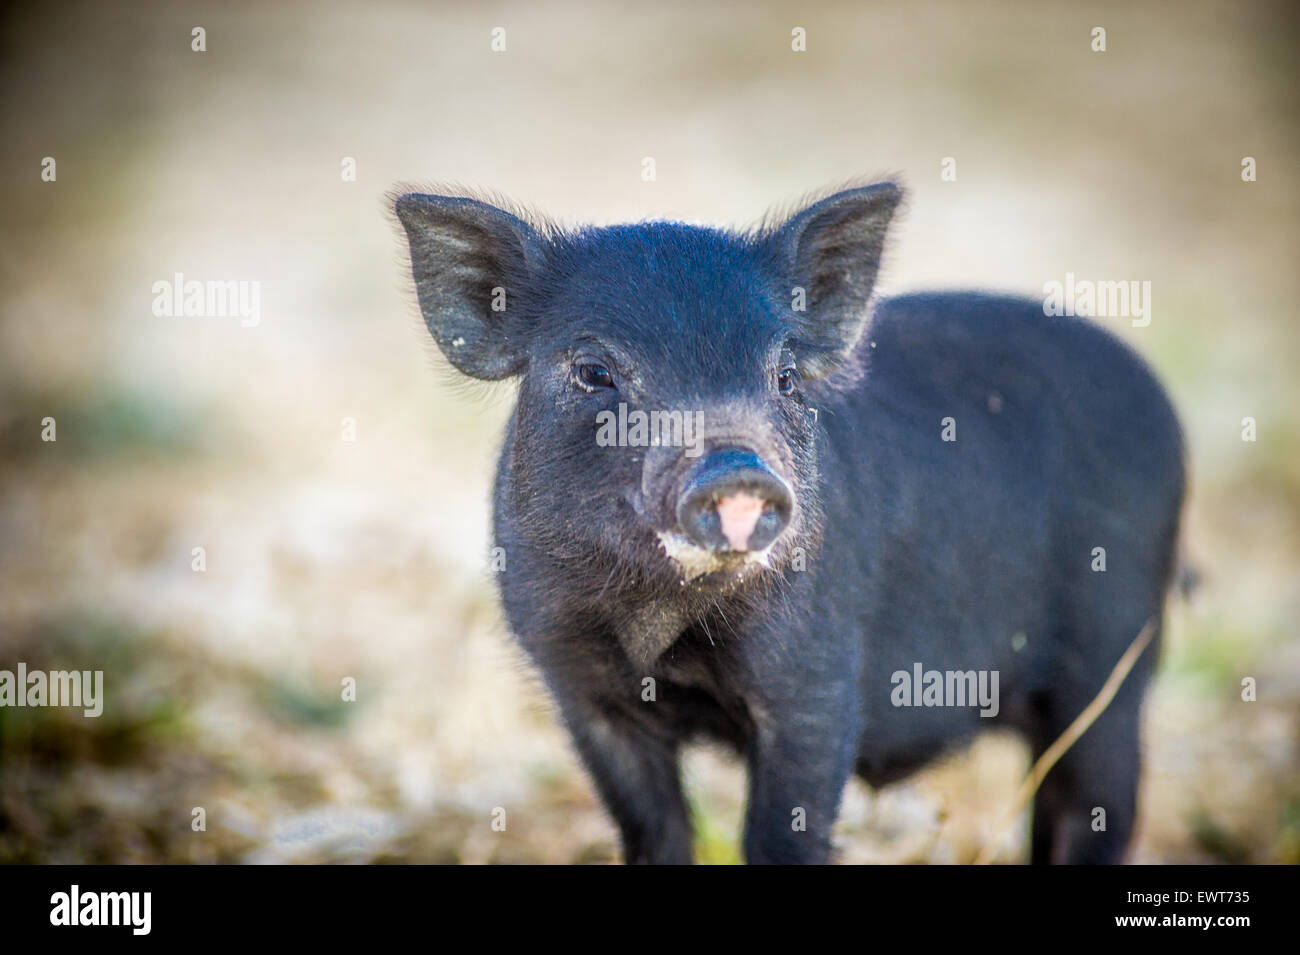 South Africa - Ferrel pot belly pigs on a farm Stock Photo